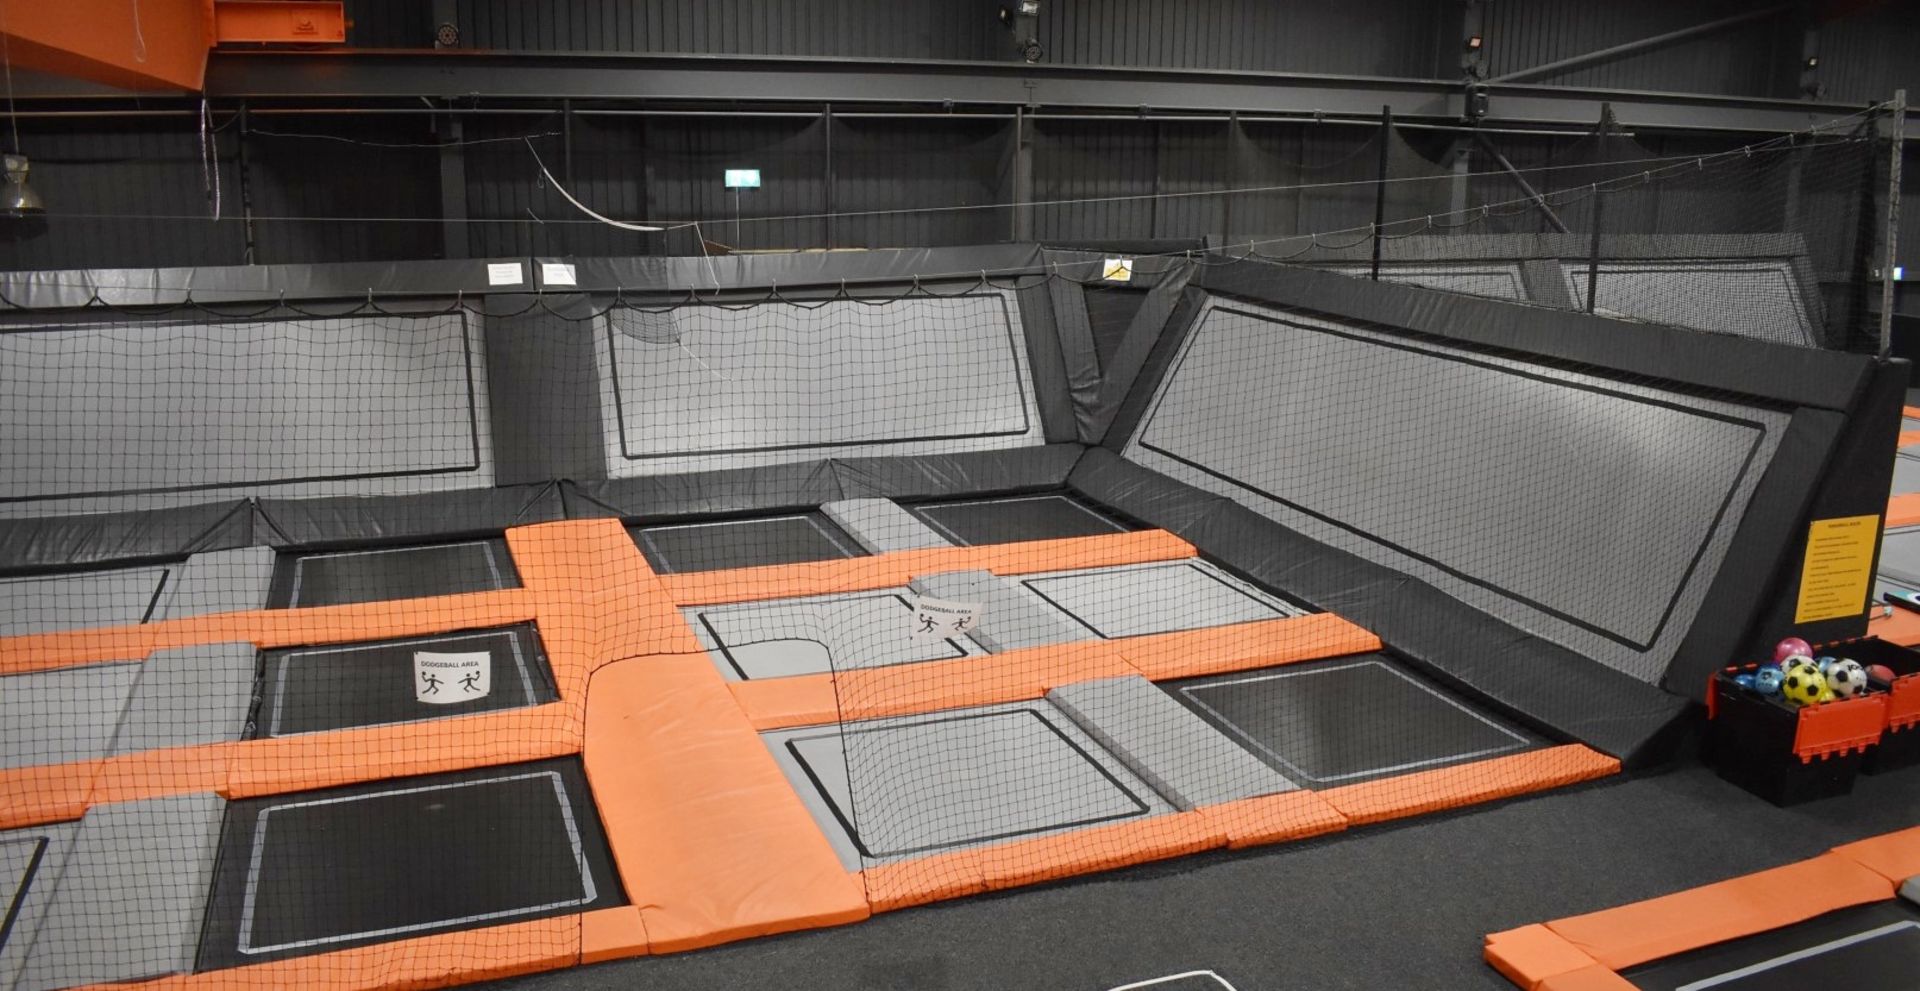 1 x Large Trampoline Park - Disassembled - Includes Dodgeball Arena And Jump Tower - CL766  - - Image 80 of 99